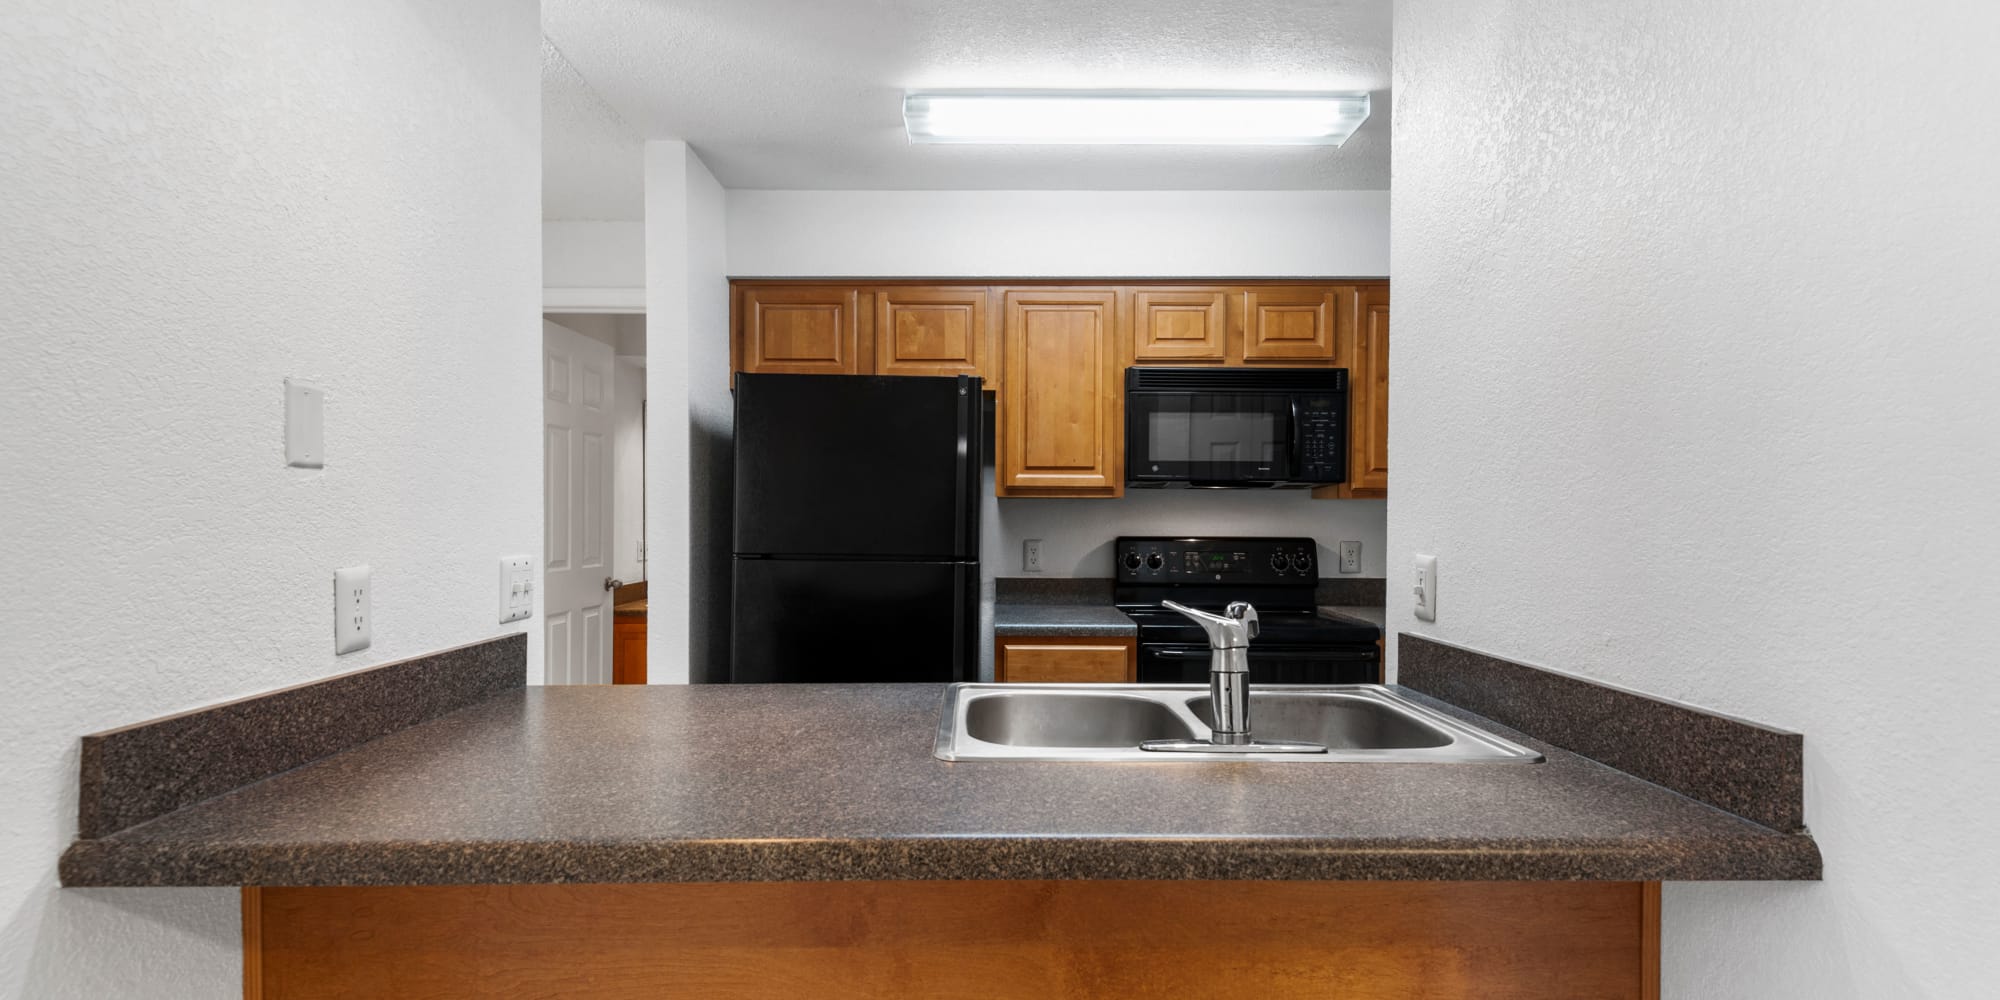 Kitchen with granite countertops at Stone Creek at Wekiva in Altamonte Springs, Florida